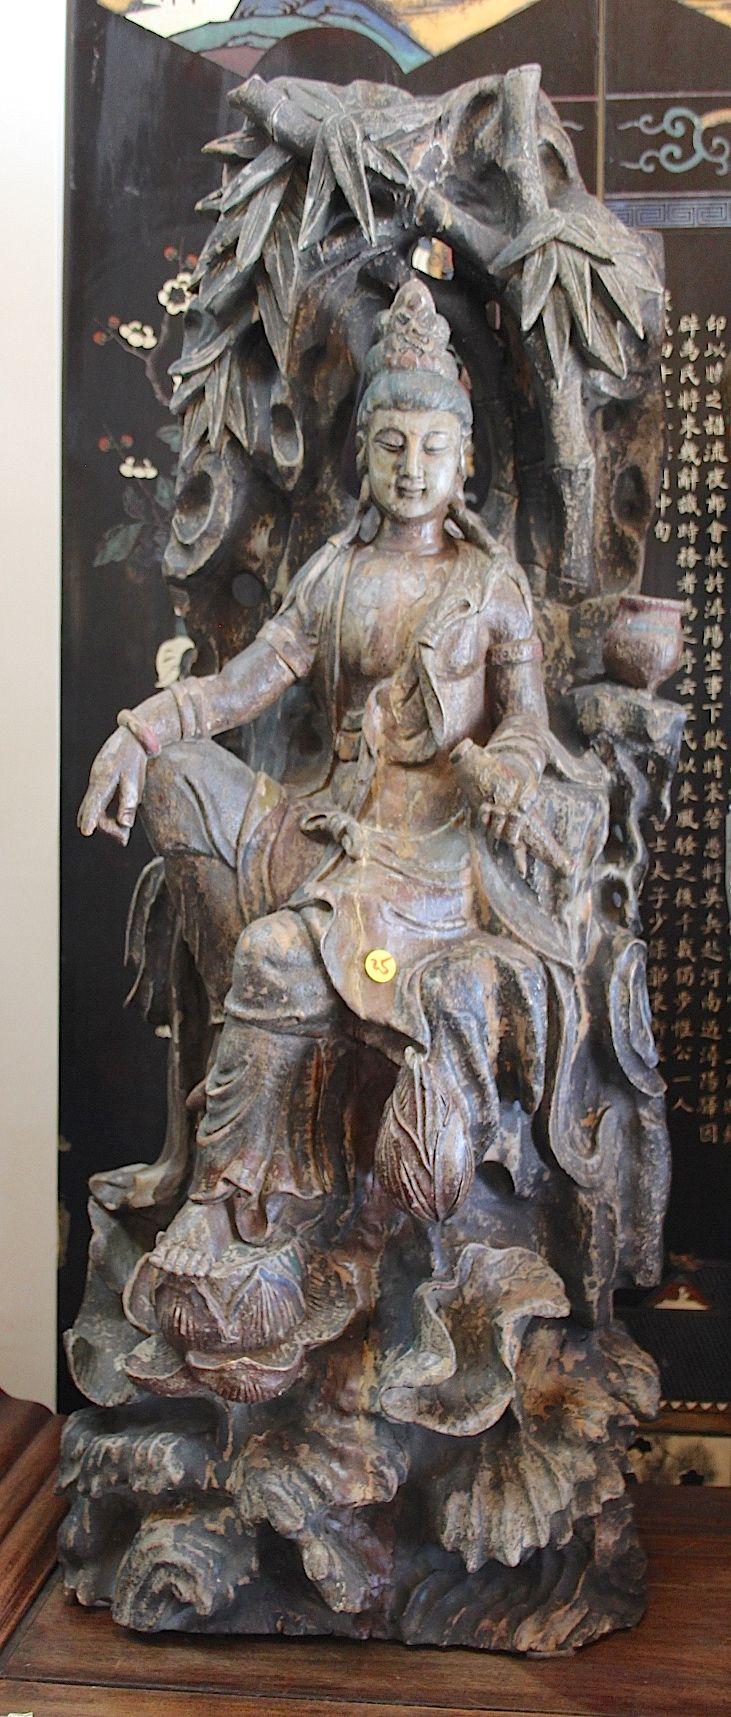 Antique wooden carved Kwan yin ( Goddess of compassion)